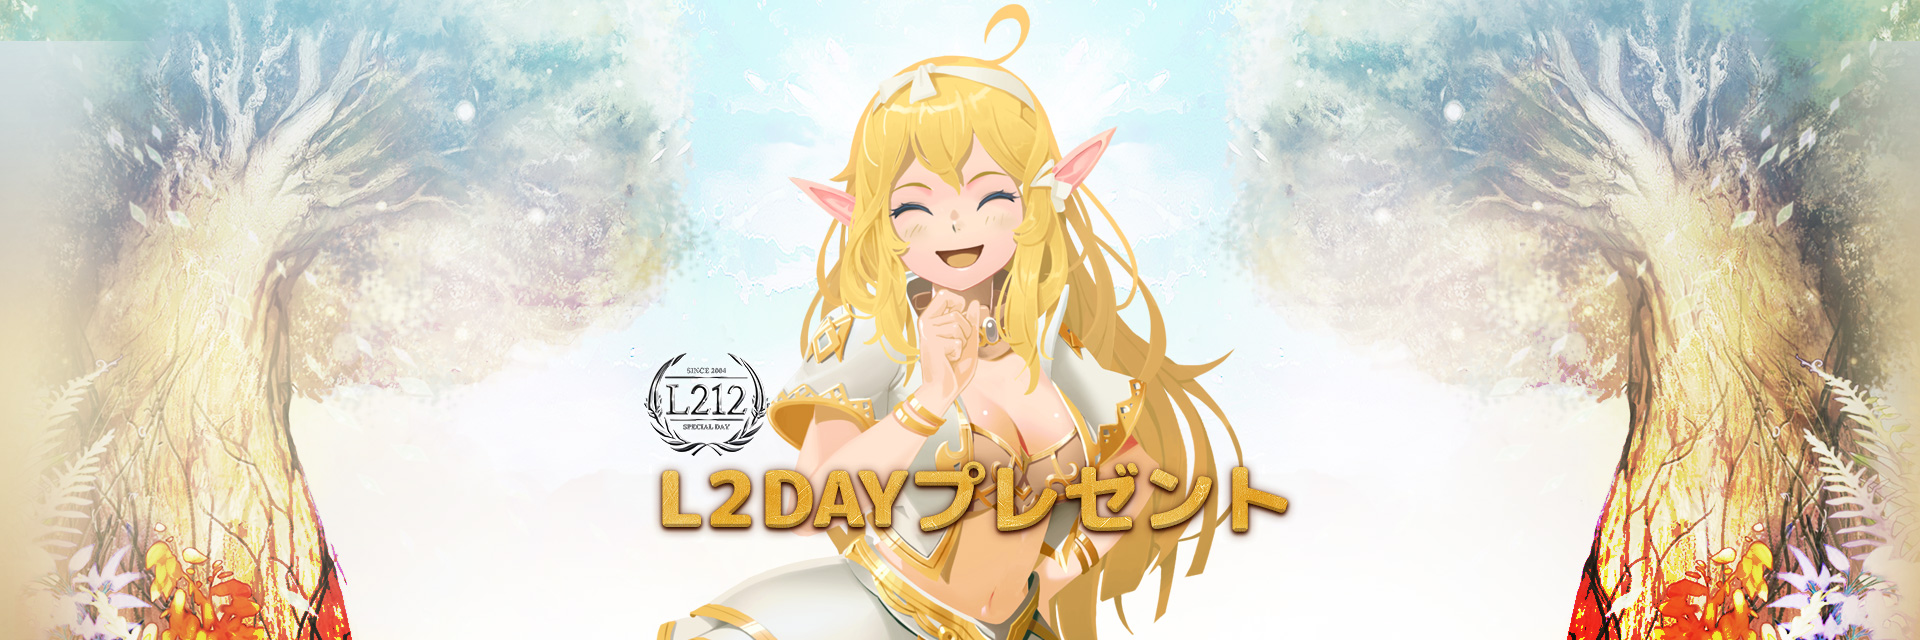 L2DAYプレゼント